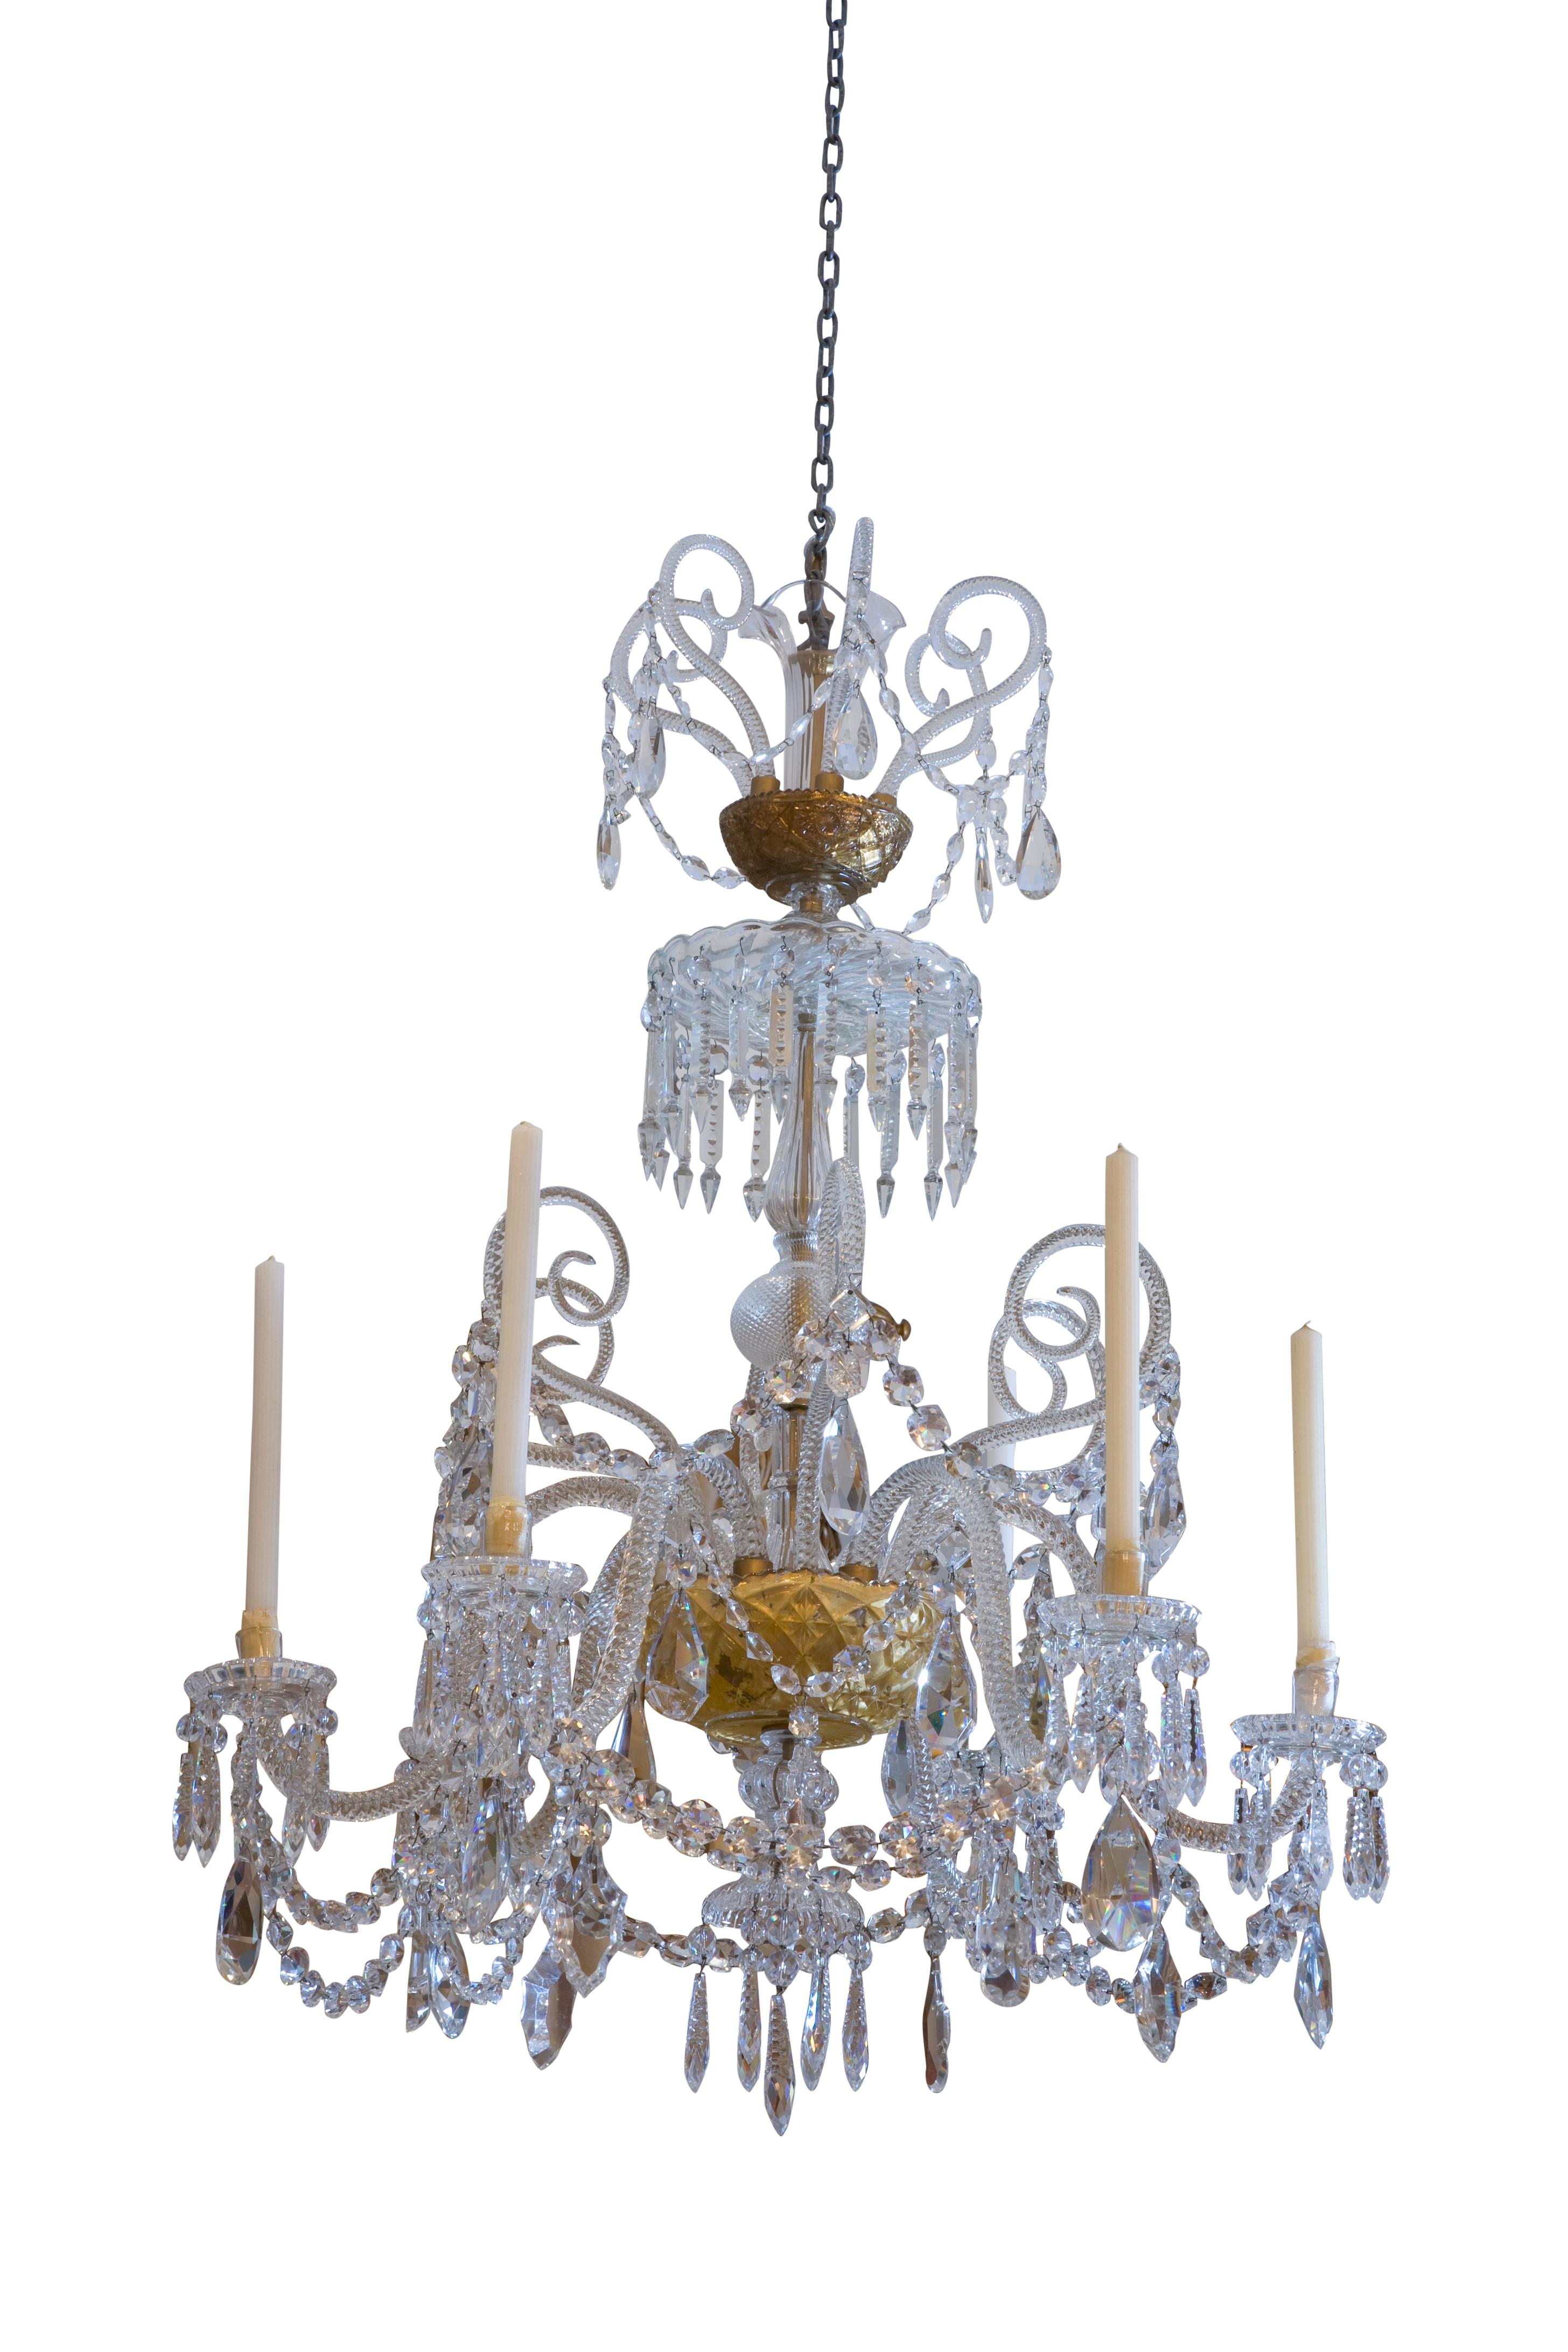 A rope-twist crystal six-arm chandelier, on three tiers, the arms and additional decorative elements stem from an interior decorated gilded glass bowl; the bobesches are stamped Baccarat, all the hanging crystals are cut and faceted in the manner